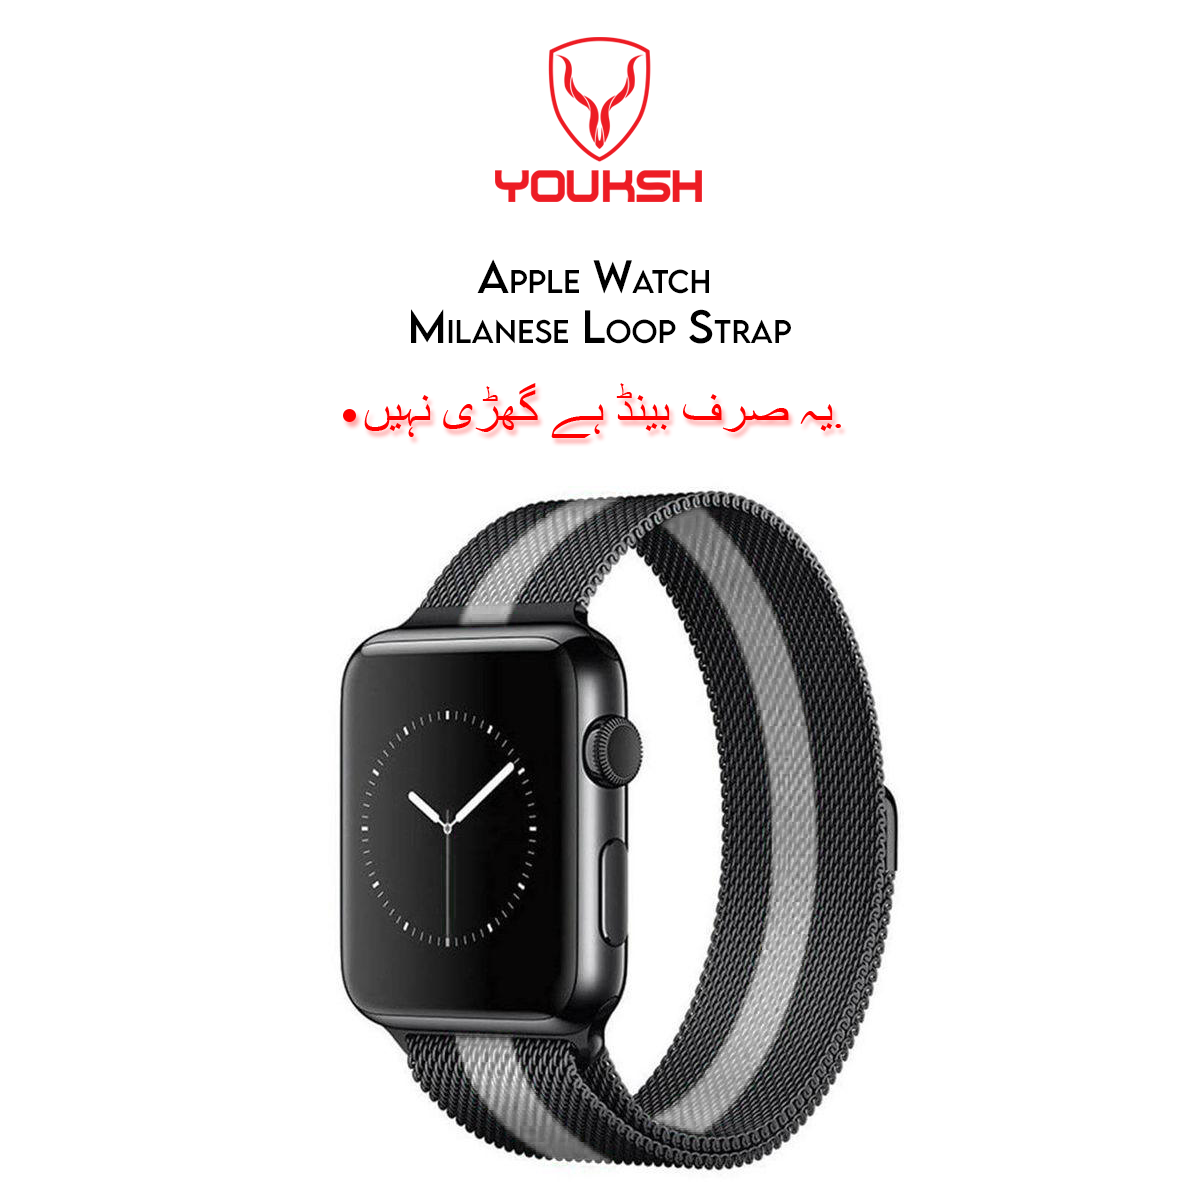 YOUKSH Apple Watch - Milanese Dual tone - Stainless Steel Strap - 38mm/40mm, For Apple Watch Series 1/2/3/4/5/6.